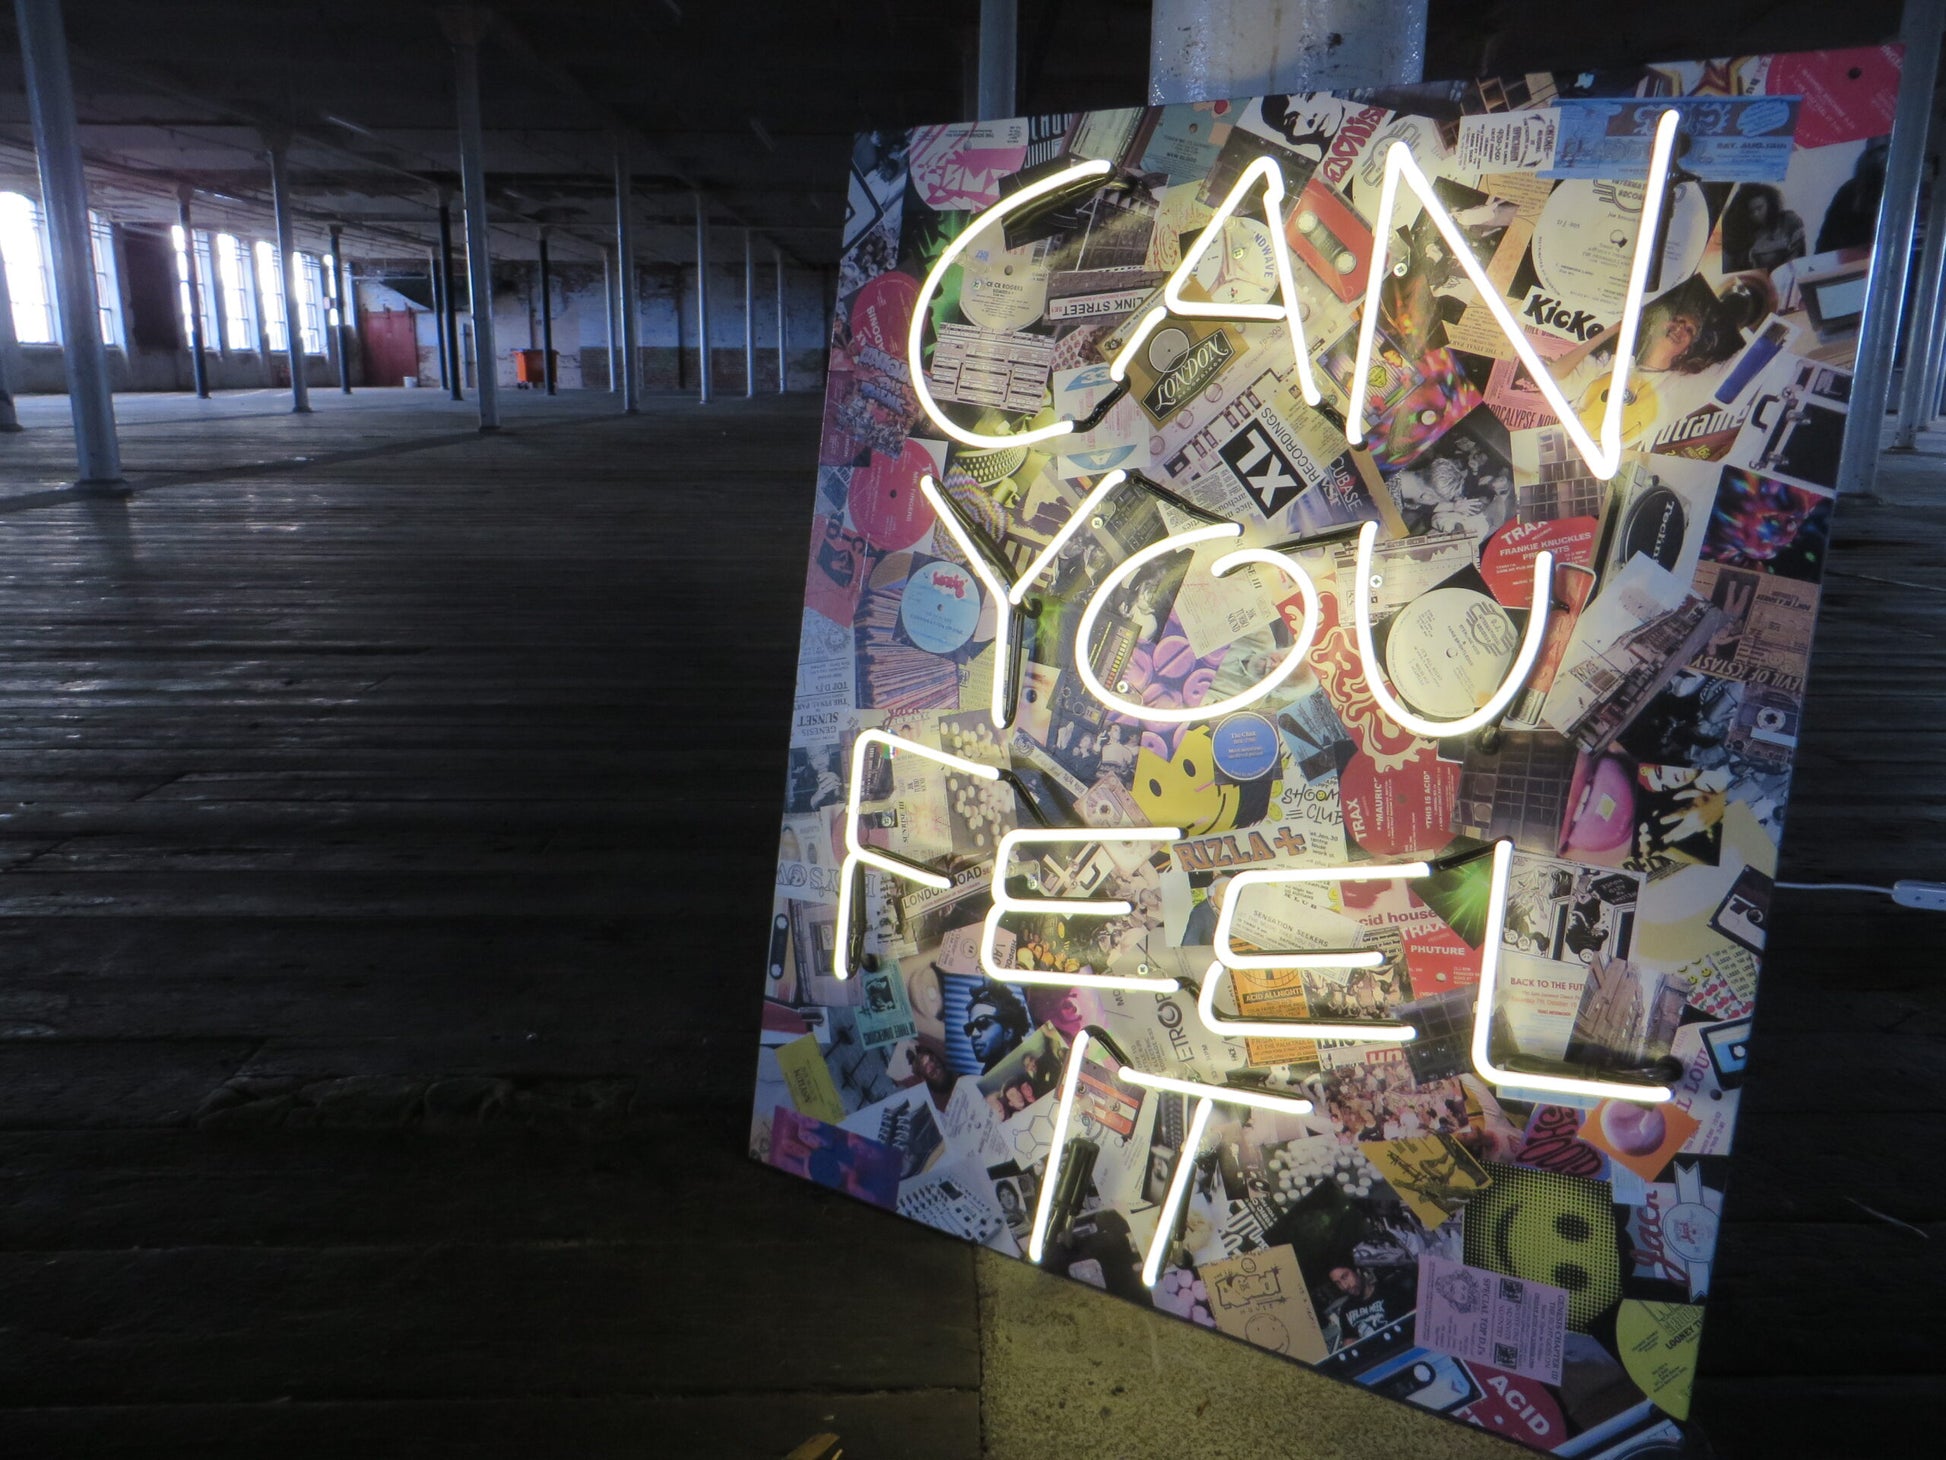 Immerse your space in the iconic 1987/1988 acid house scenes with Tony Spink's Can You Feel It. This one-of-a-kind artwork features white neon on a wooden panel adorned with a collage depicting memorabilia from the acid house era. Measuring 70 x 80 cm, this original masterpiece is a unique fusion of white neon art and nostalgic design. Elevate your space with this distinctive neon artwork, capturing the essence of a bygone musical era.